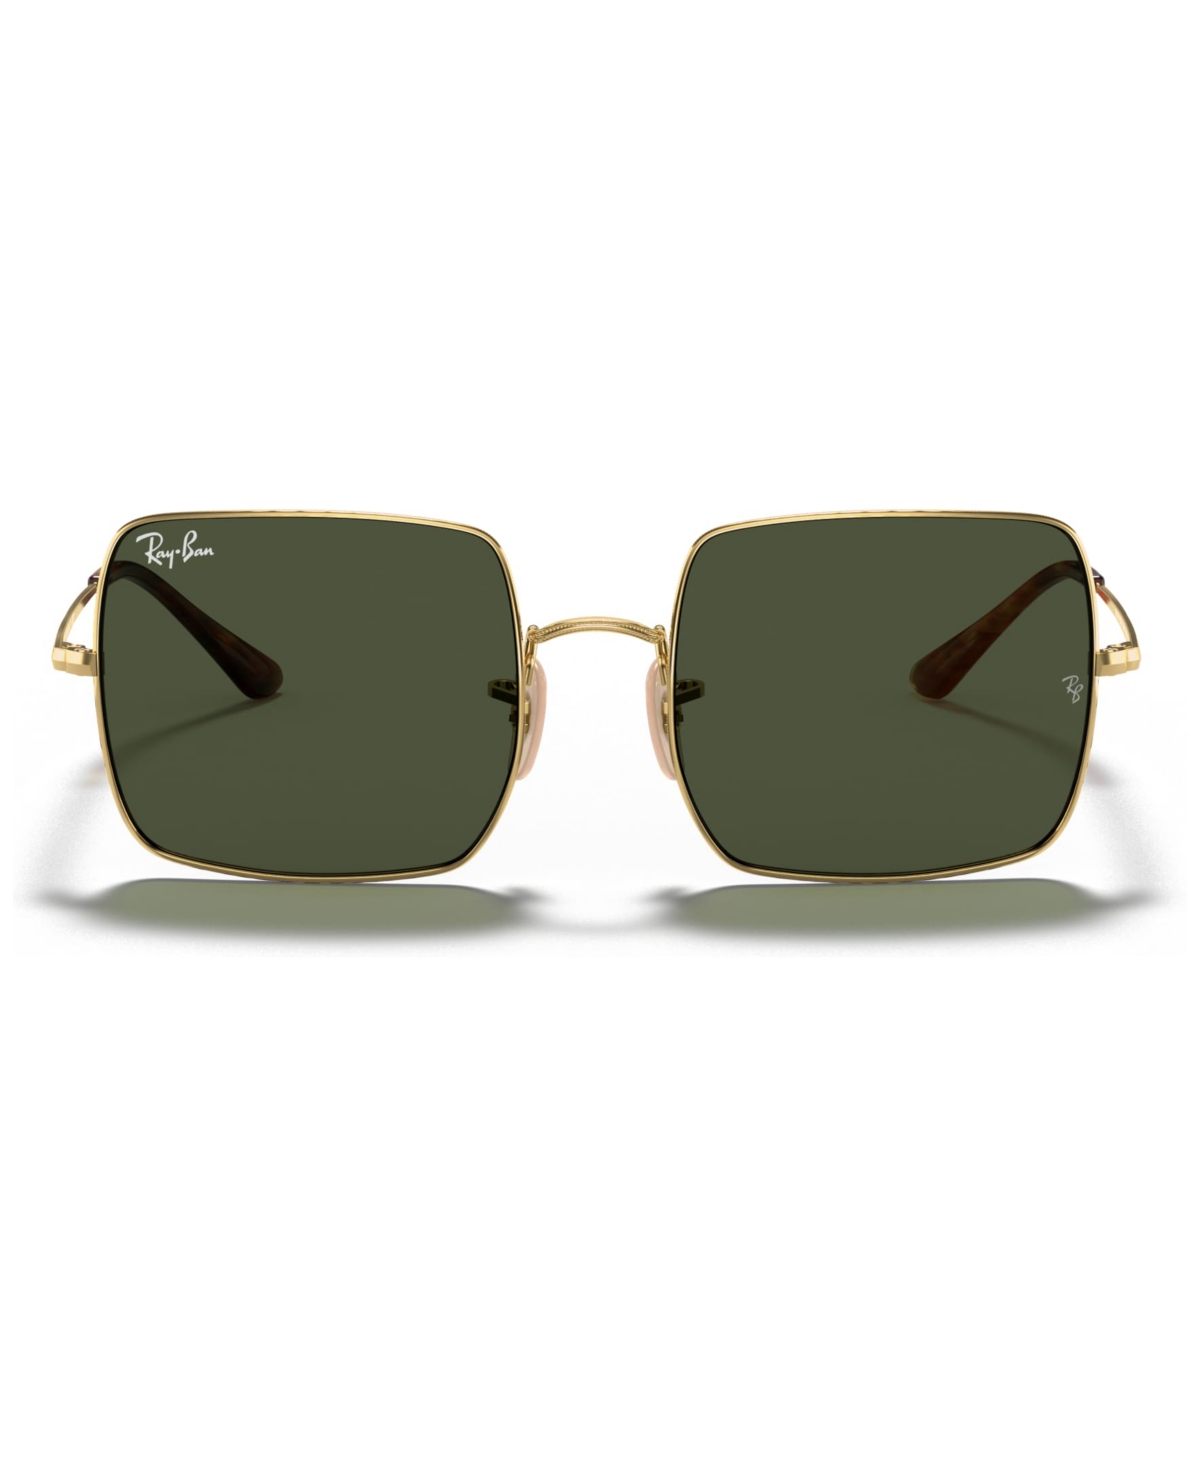 Grant Ounce sum Ray-Ban Women's Sunglasses, RB1971 54 SQUARE 1971 CLASSIC & Reviews -  Sunglasses by Sunglass Hut - Handbags & Accessories - Macy's